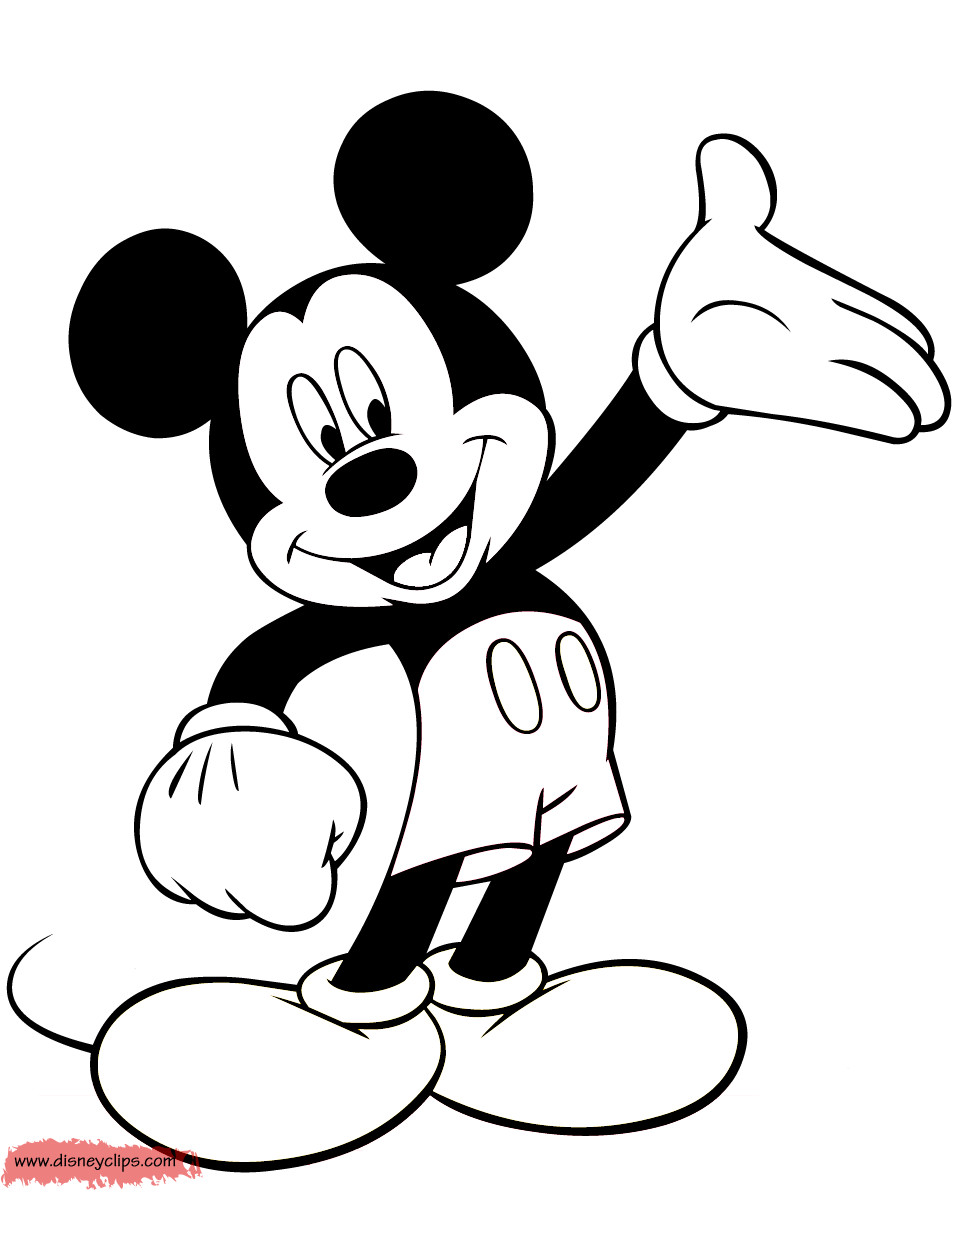 Mickey Mouse Coloring Pages For Girls
 Top Mickey Mouse Coloring Pages Library Coloring Pages